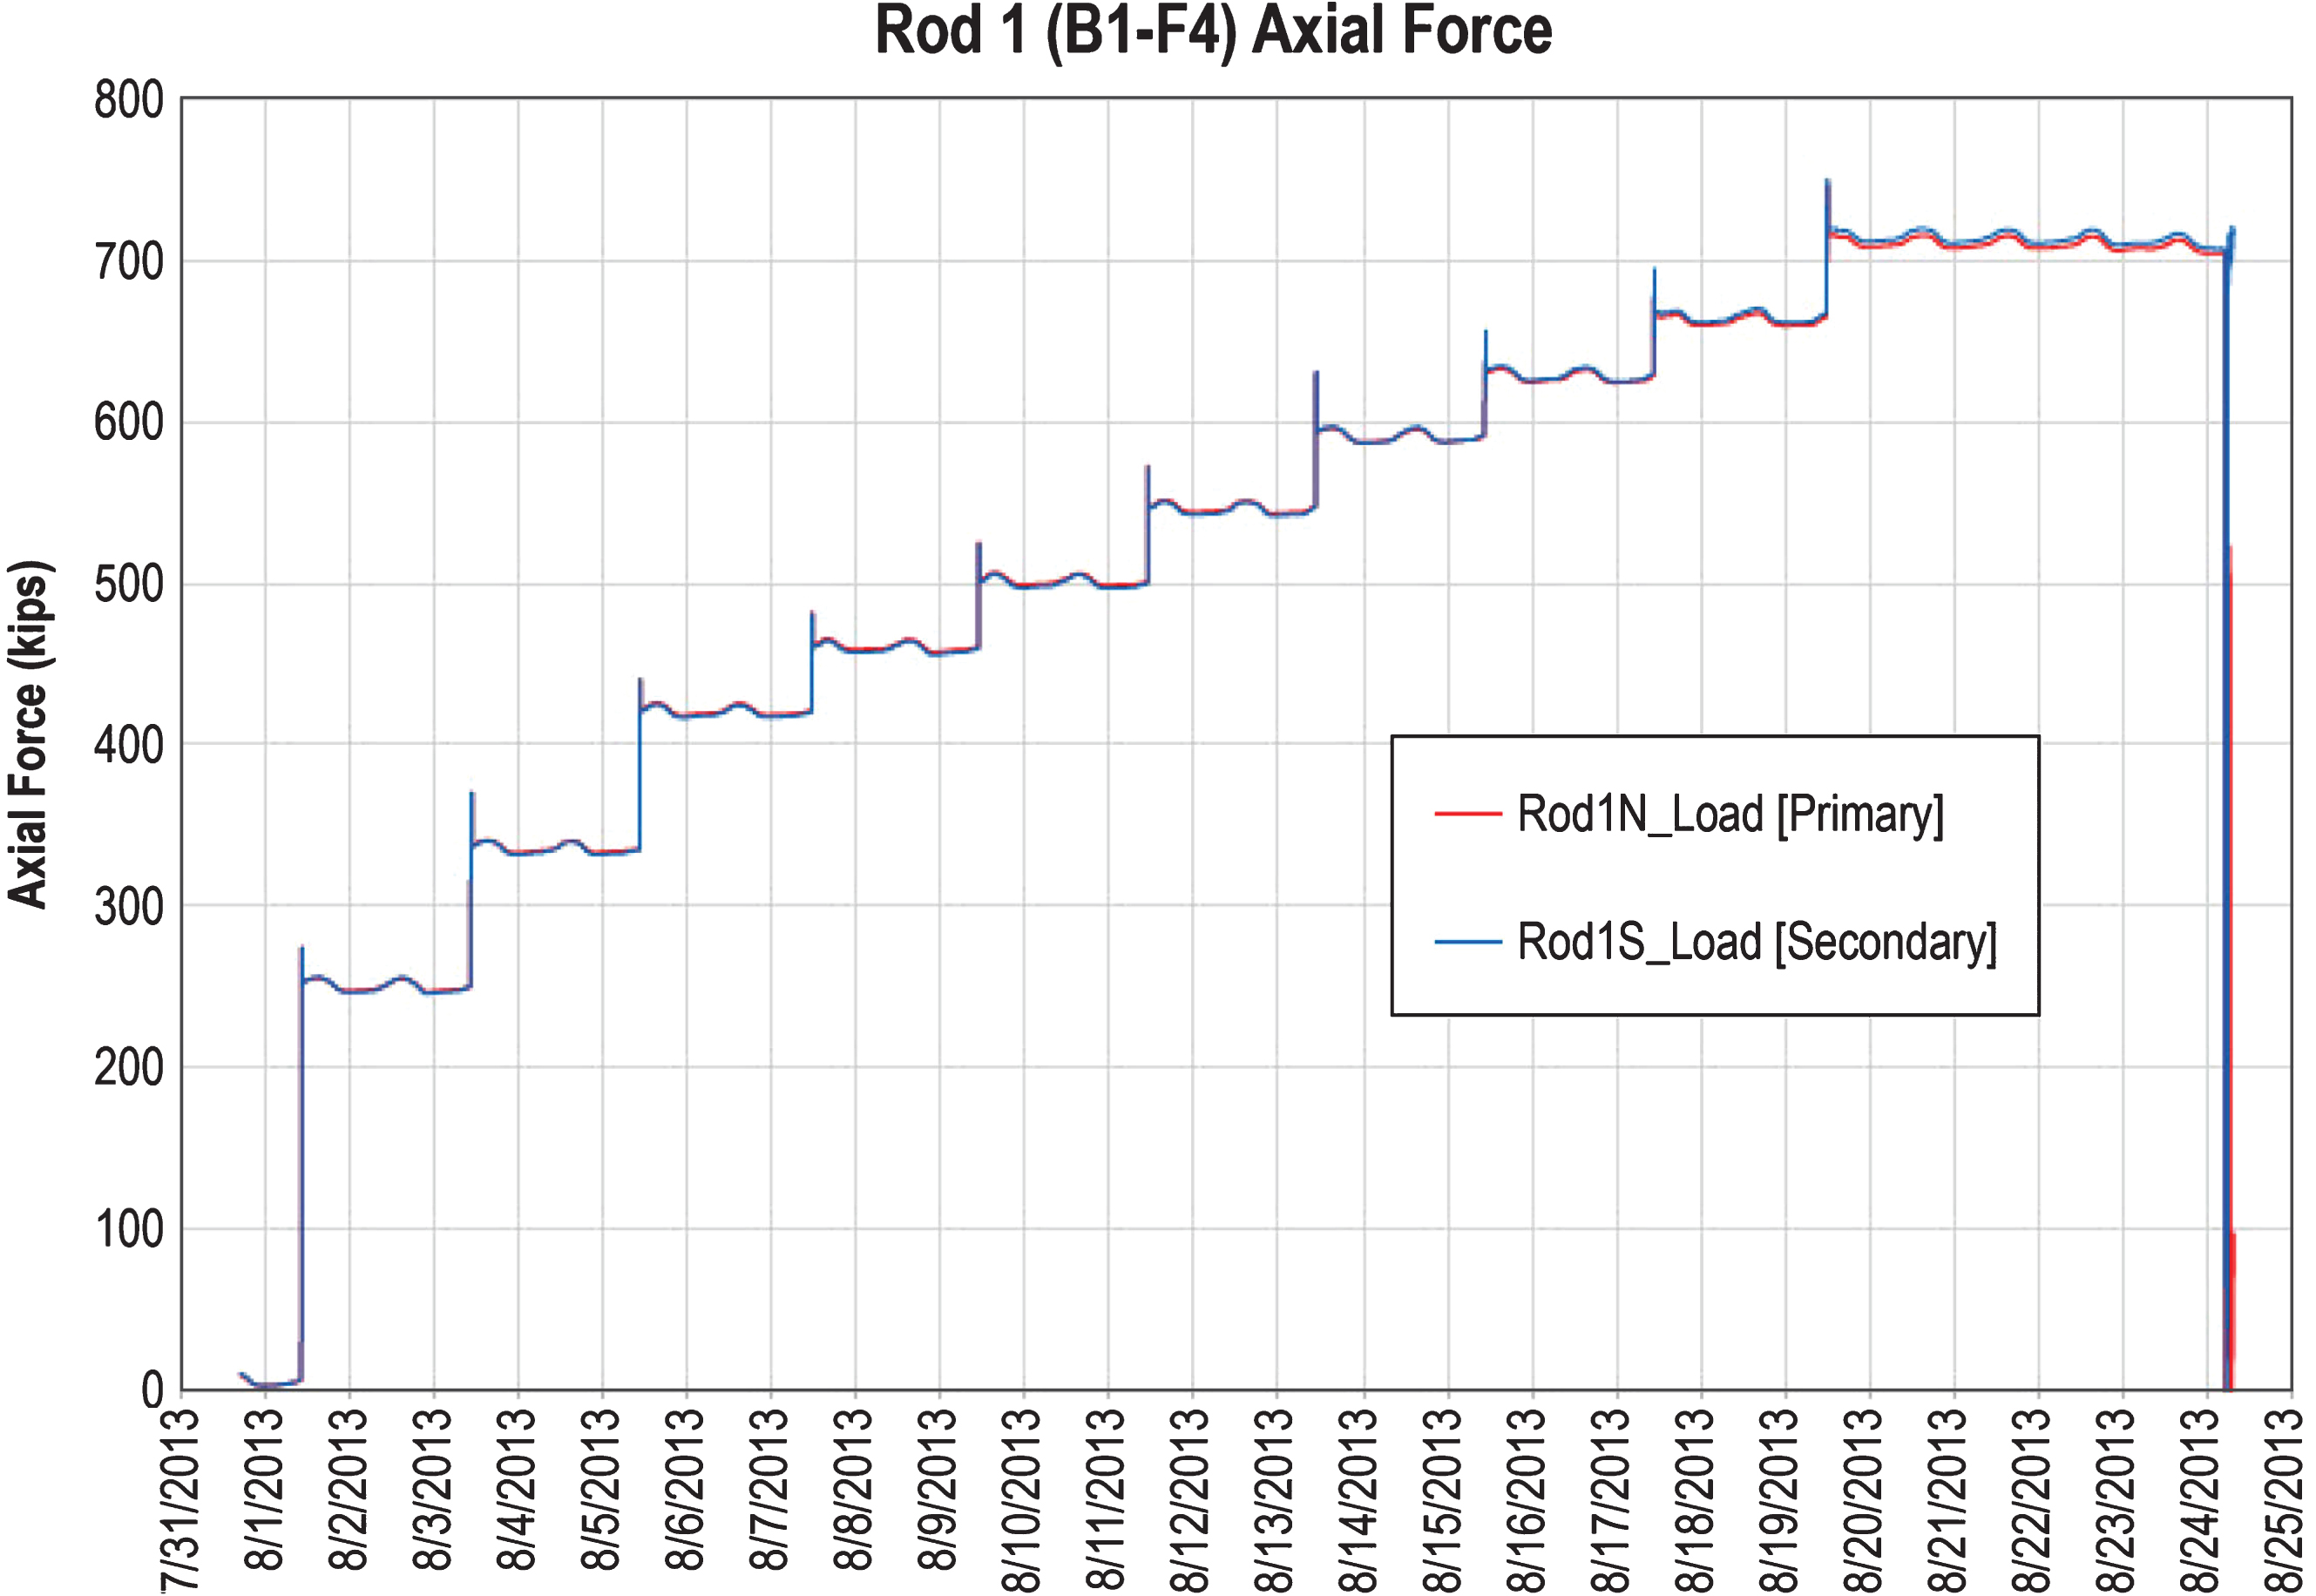 Typical plot of load vs. test time, showing step increases in load until failure at 0.85 Fu (Rod 1).